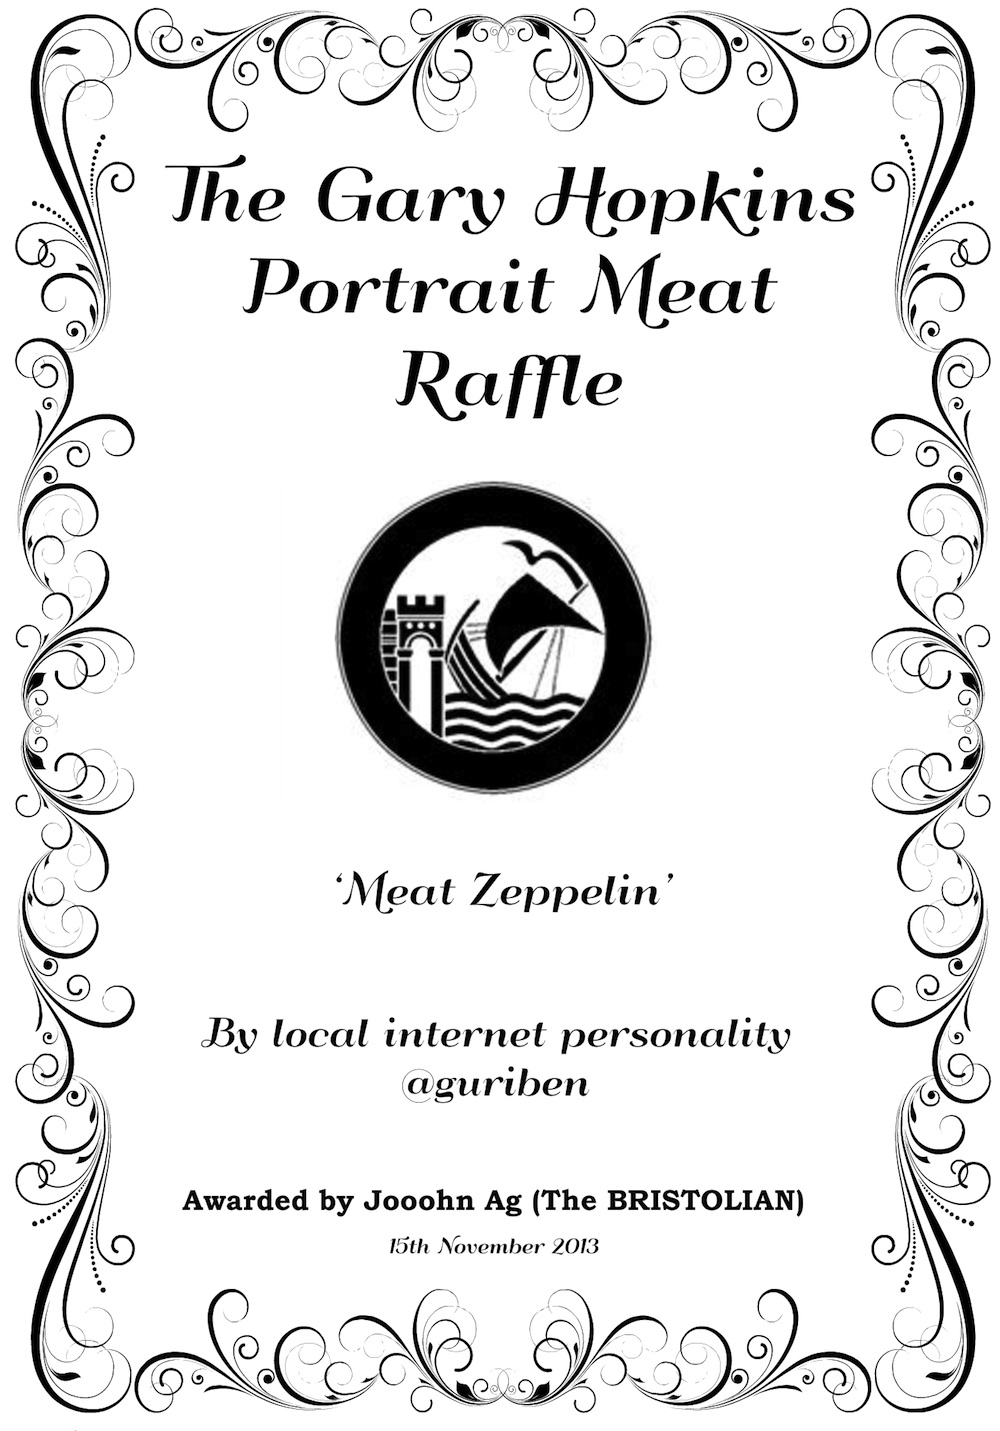 That Gary Hopkins Meat Raffle prize certificate in full